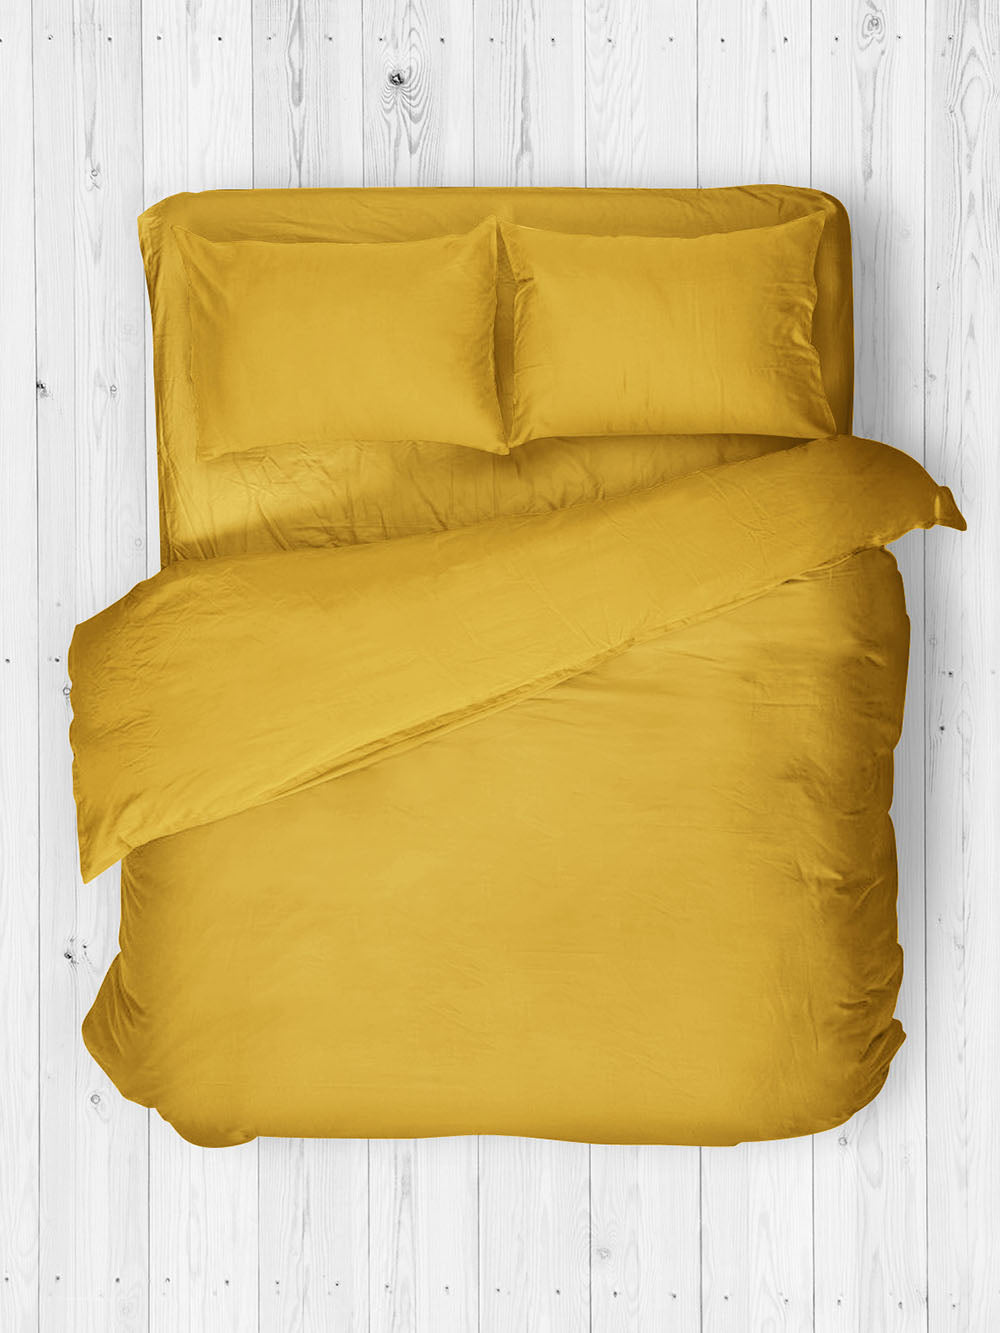 House no. 23 Super Soft Double Gauze Cotton Bedding, Queen & King on Food52